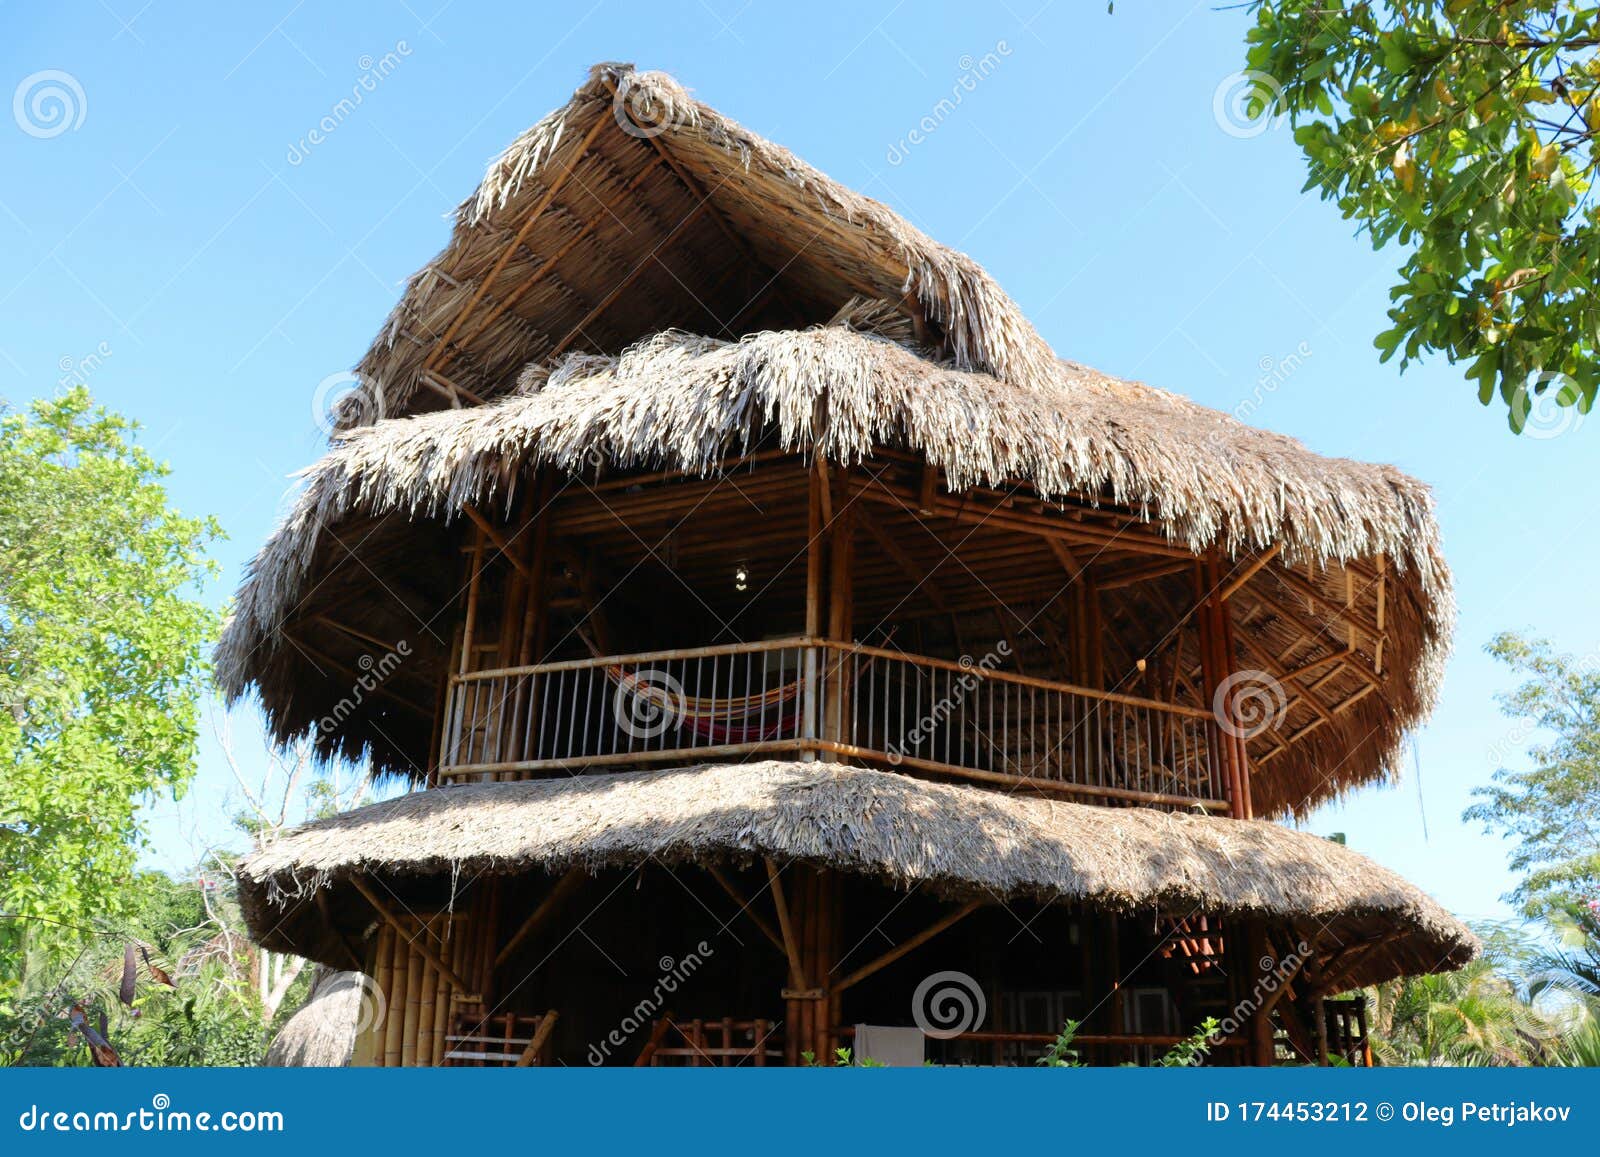 house of bamboo and shingles